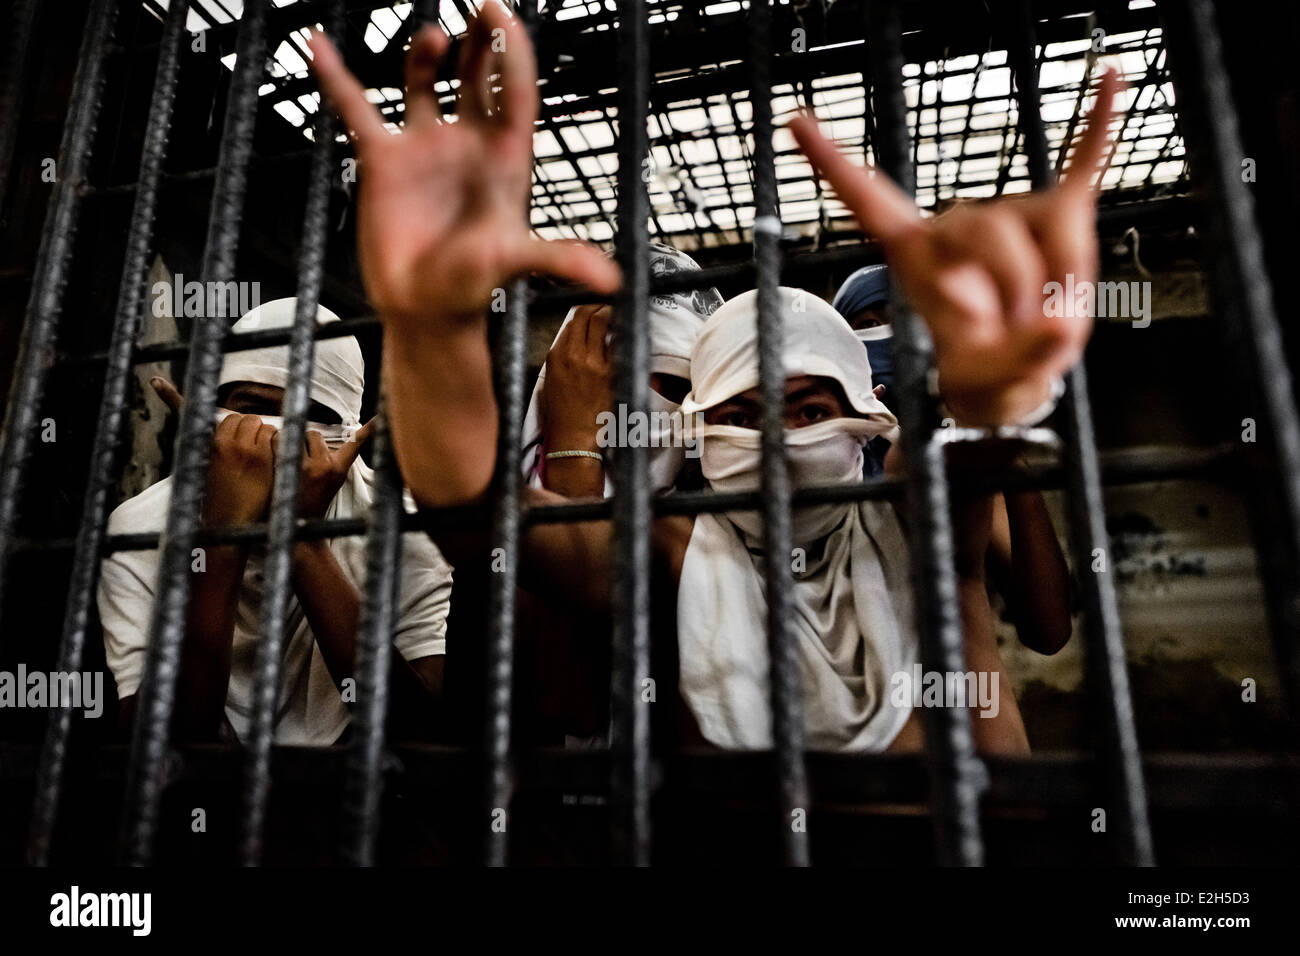 The Mara Salvatrucha gang members show finger signs representing their gang while being detained in San Salvador, El Salvador. Stock Photo